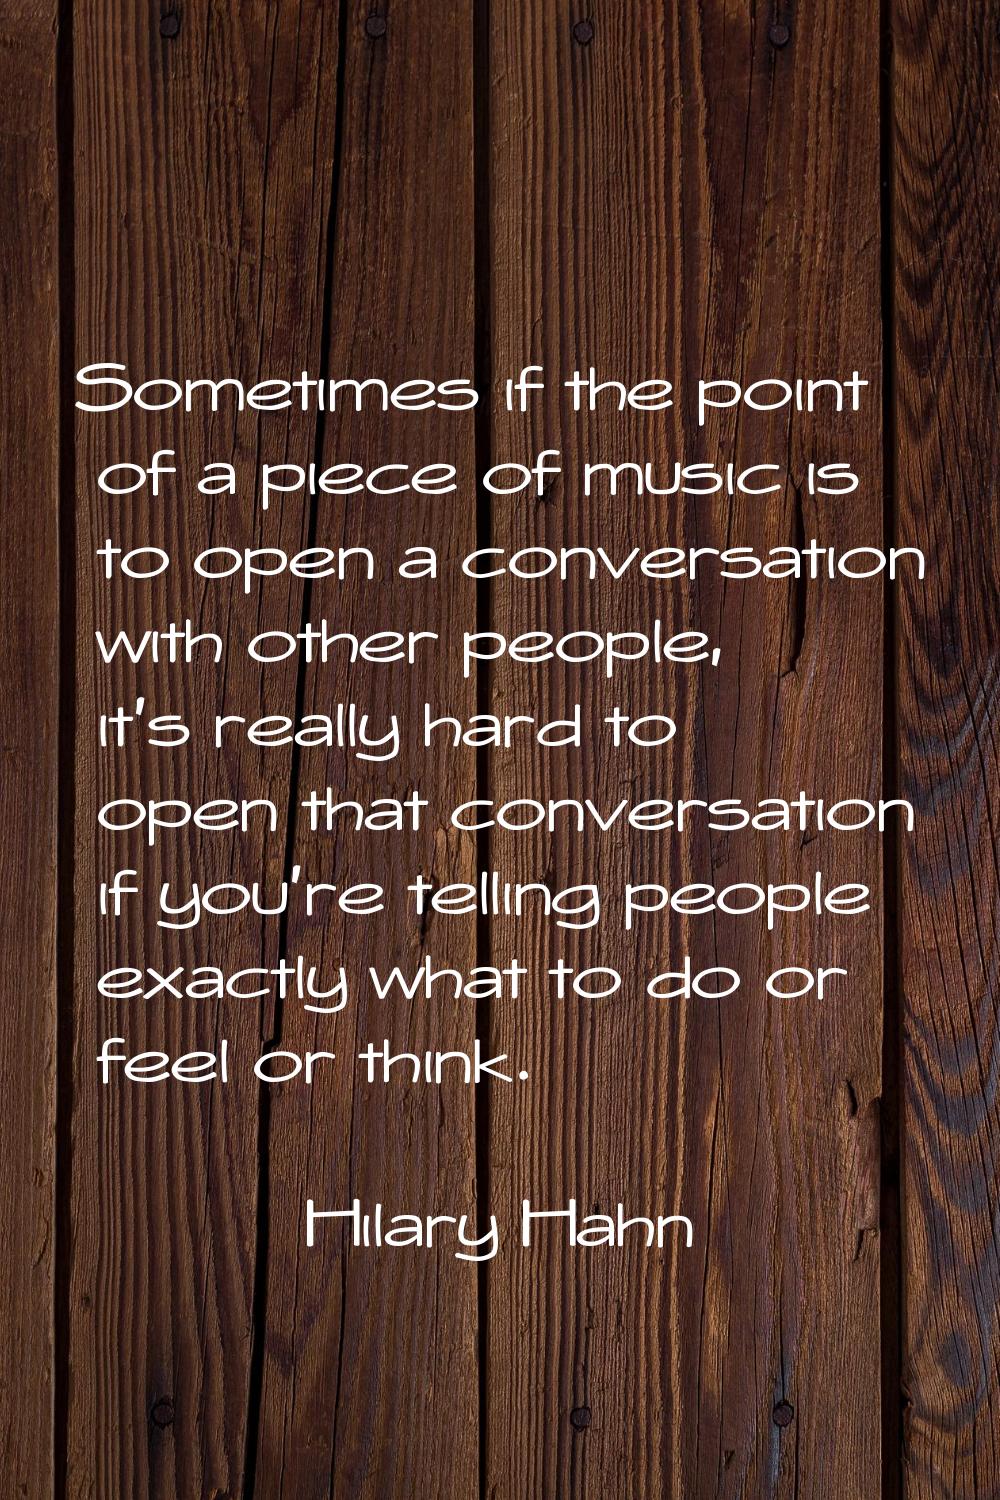 Sometimes if the point of a piece of music is to open a conversation with other people, it's really